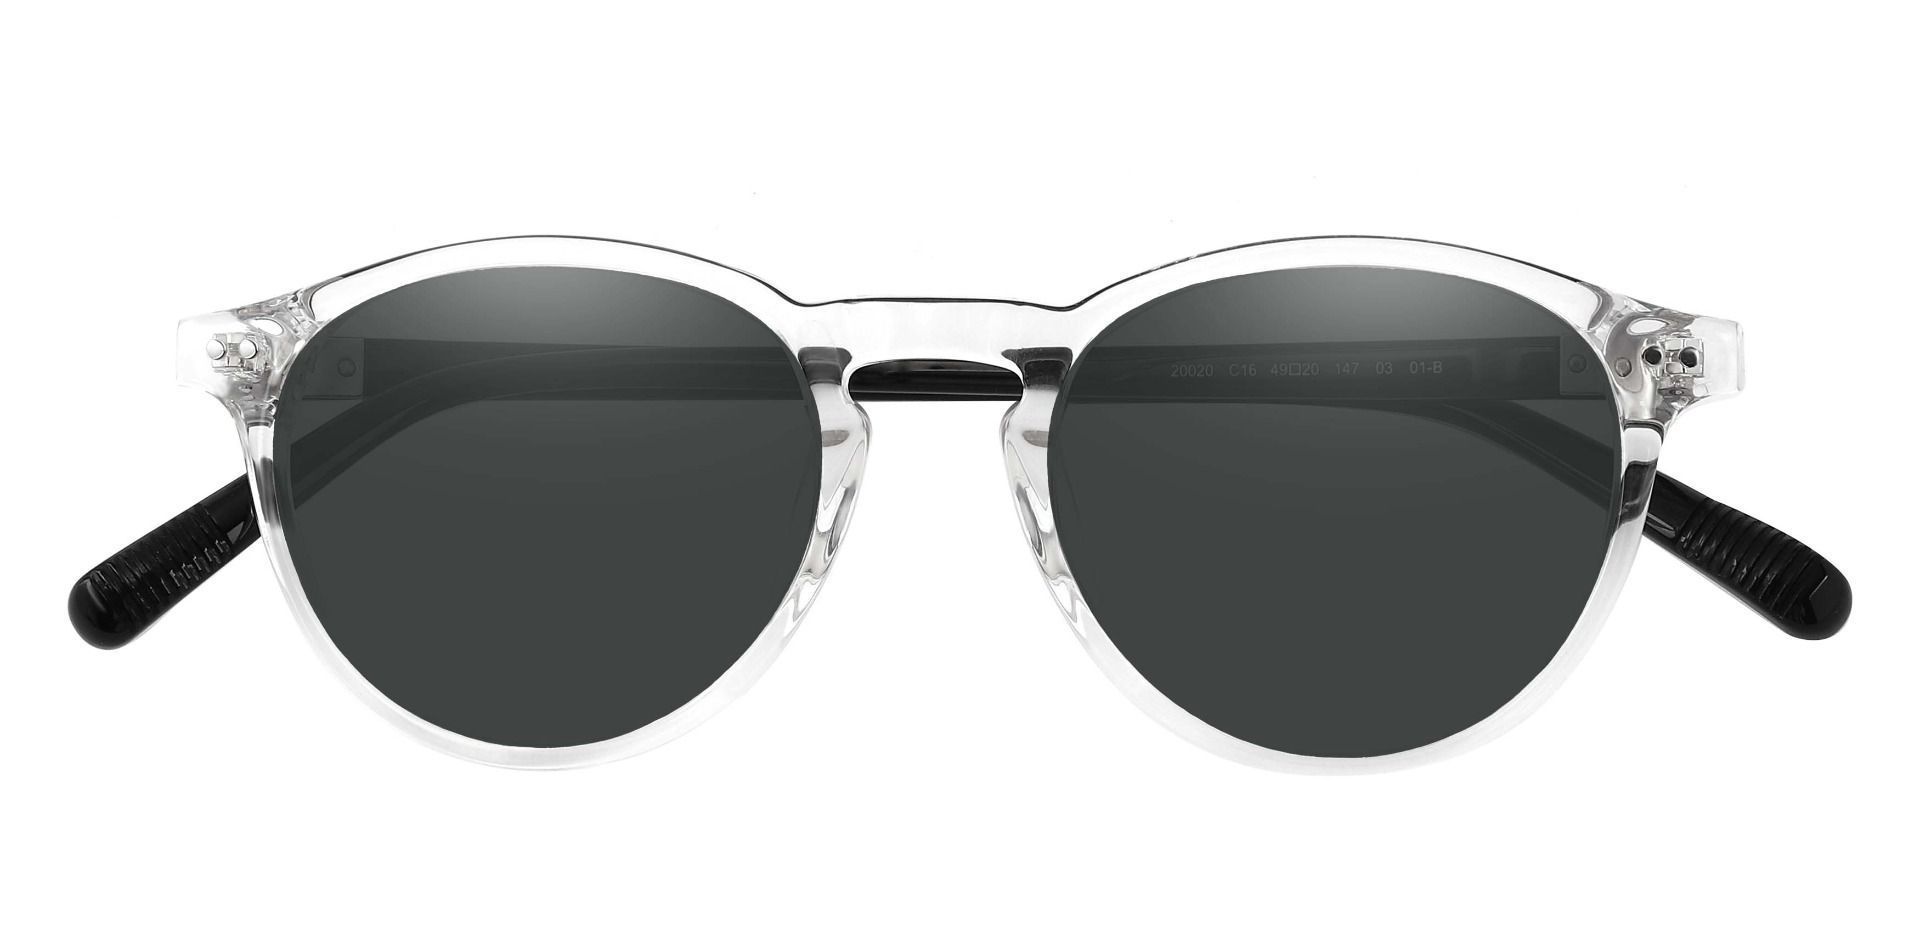 Monarch Oval Non-Rx Sunglasses - Clear Frame With Gray Lenses